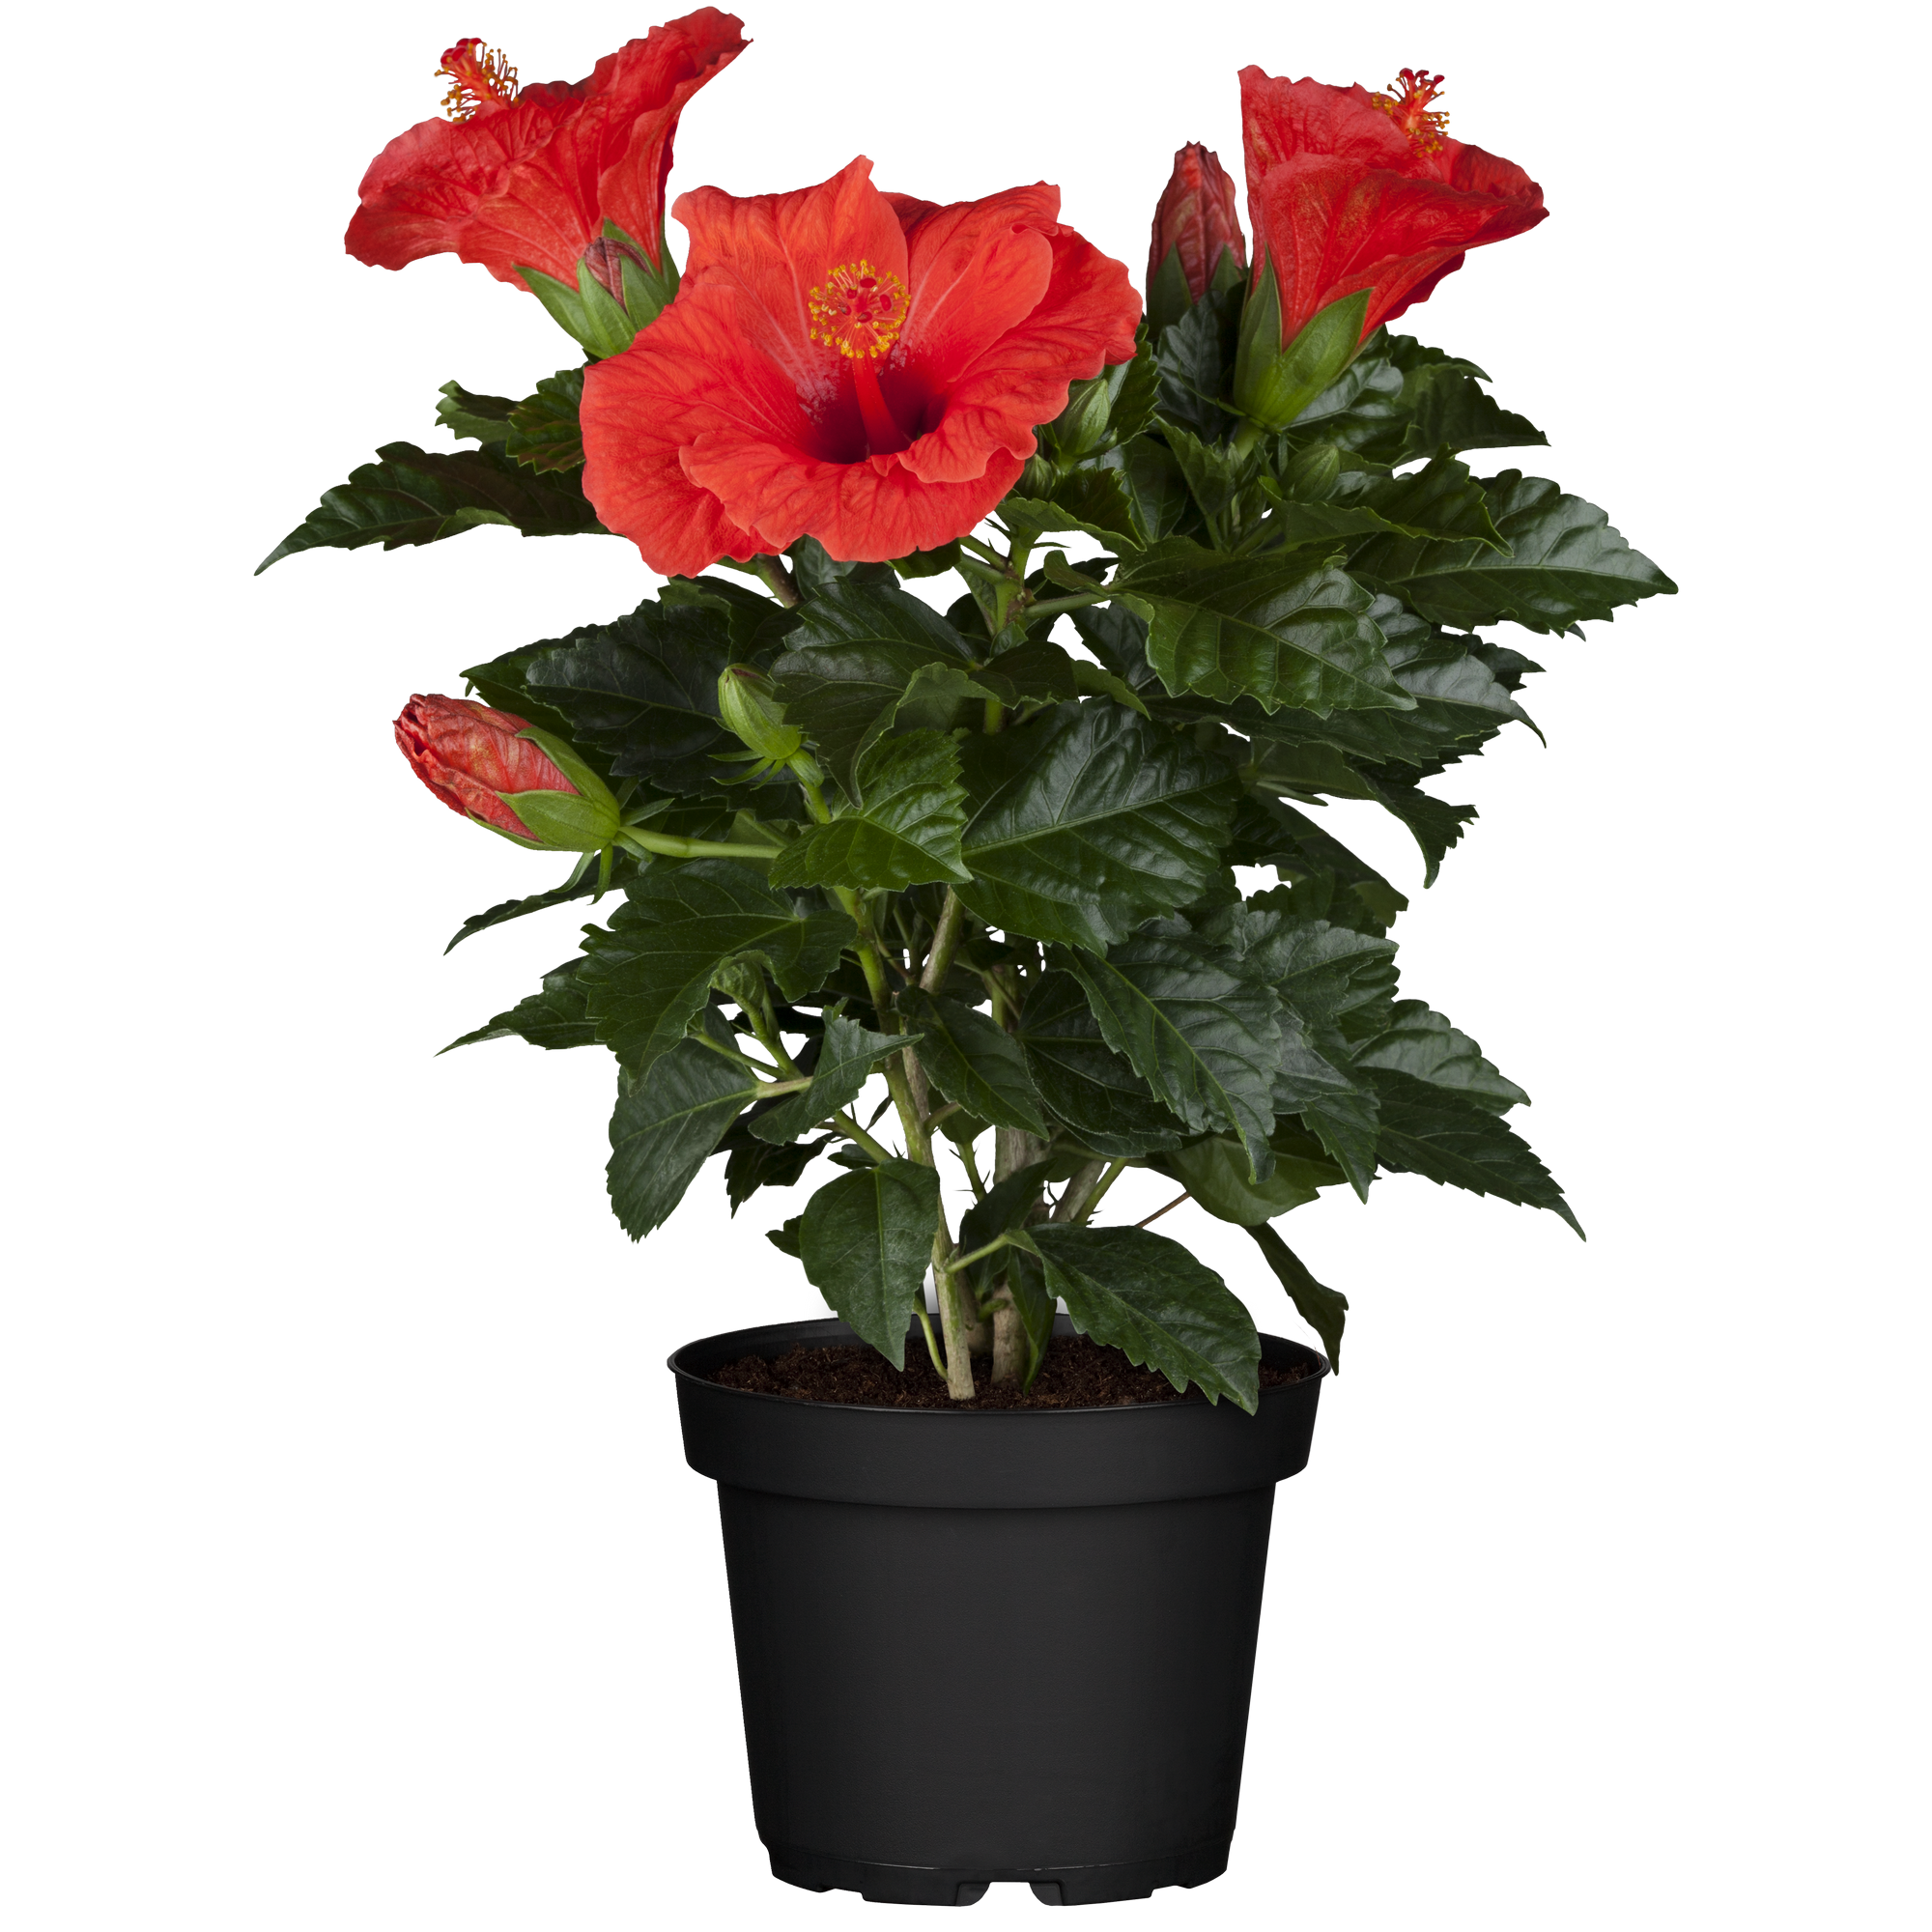 Zimmer-Hibiskus 'Long Life' rot, 13 cm Topf + product picture